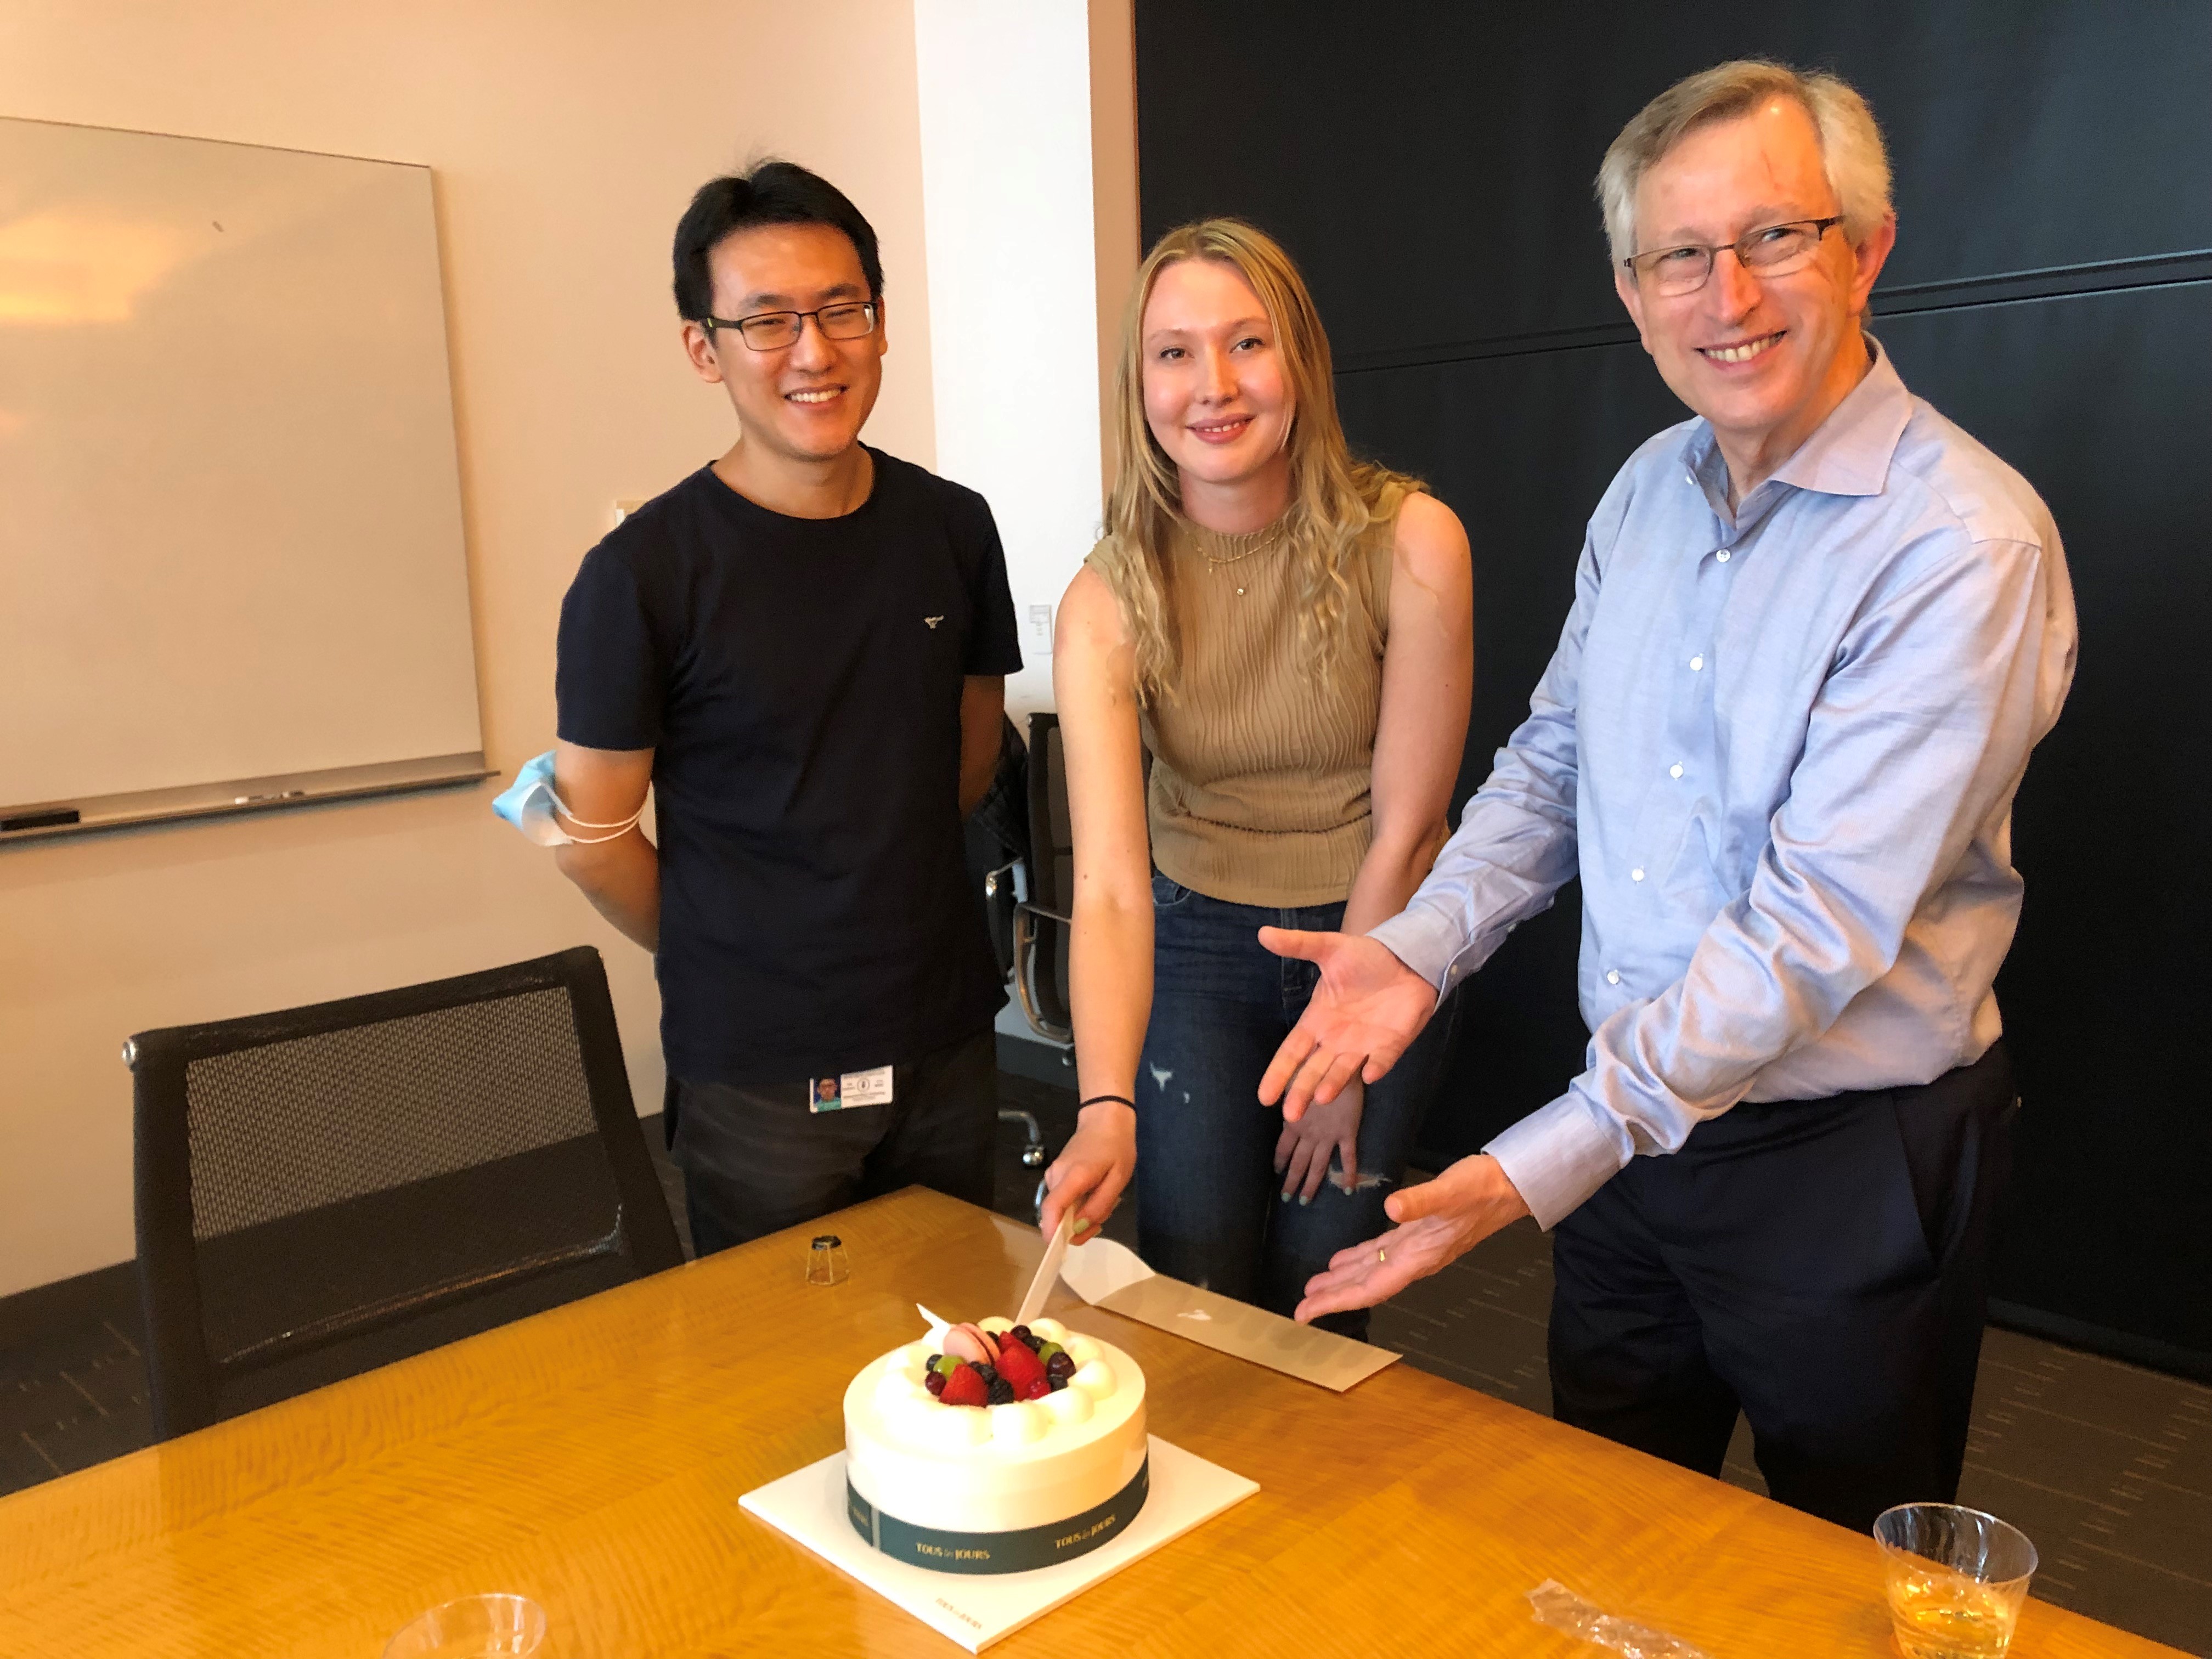 Farewell Lila - Lila who departed us as a GSK Graduate student